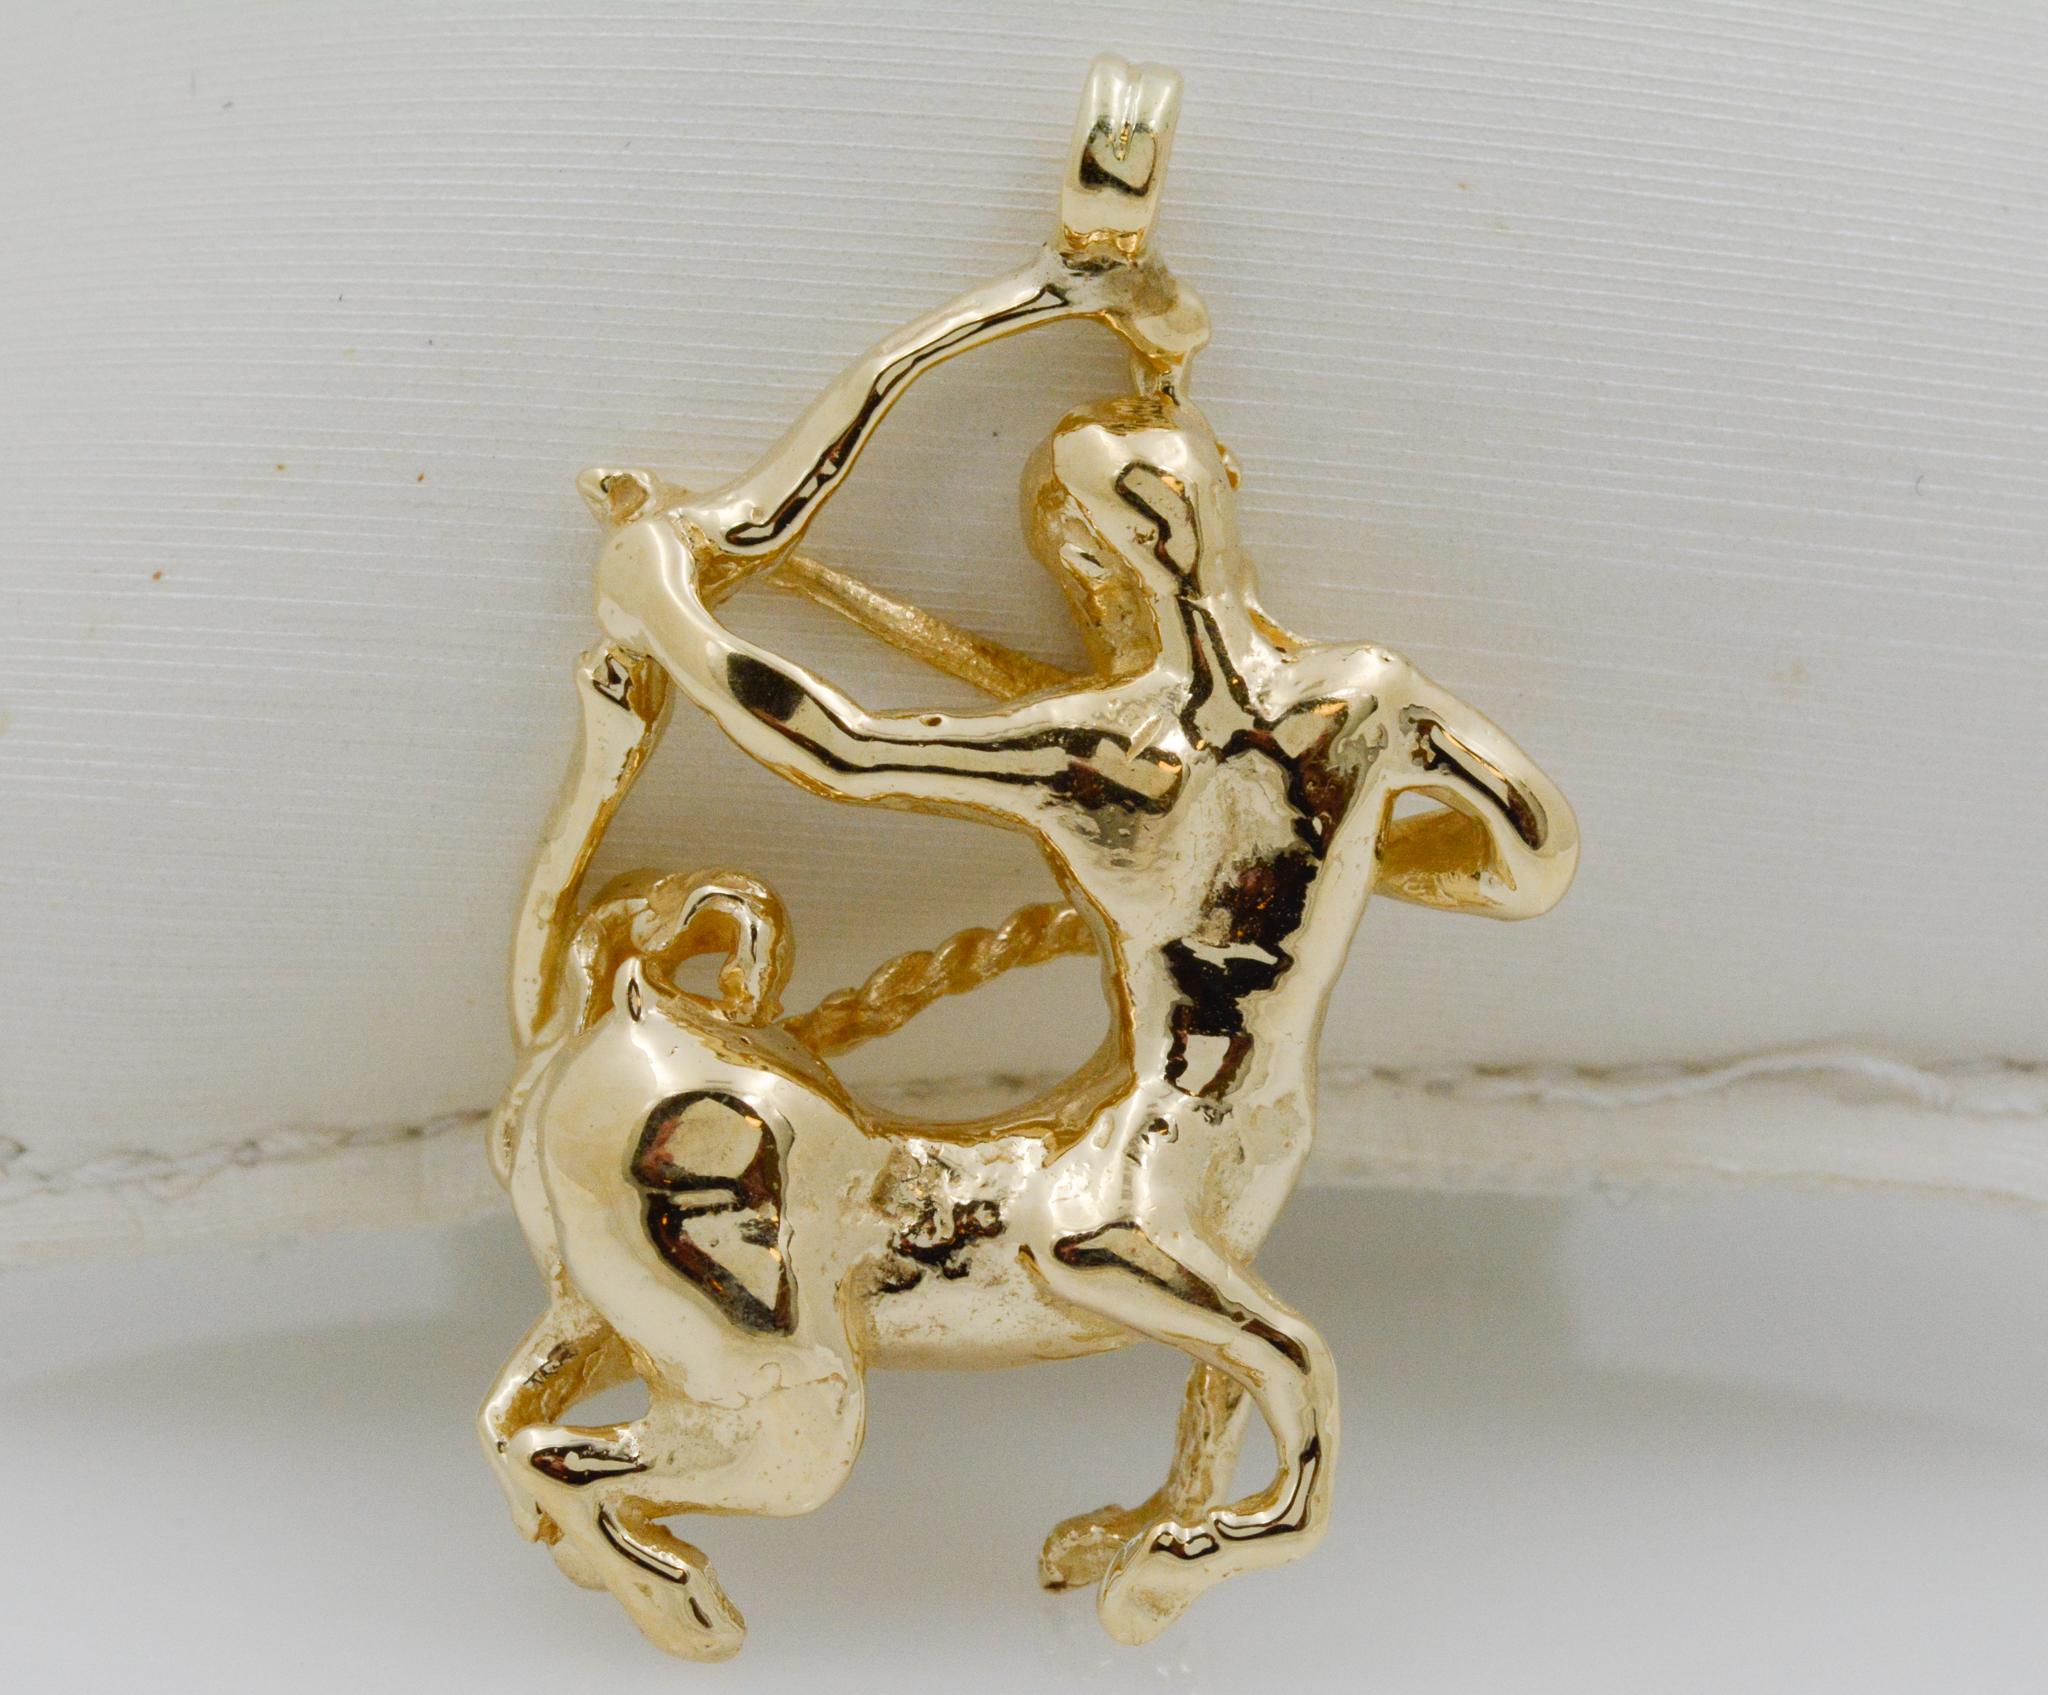 This 14k yellow gold charm features a centaur design, holding a bow and arrow. A centaur is a mythical creature with the torso of a man, and the lower body of a horse, complete with hooves and a tail. Originating from Greek mythology, and much of